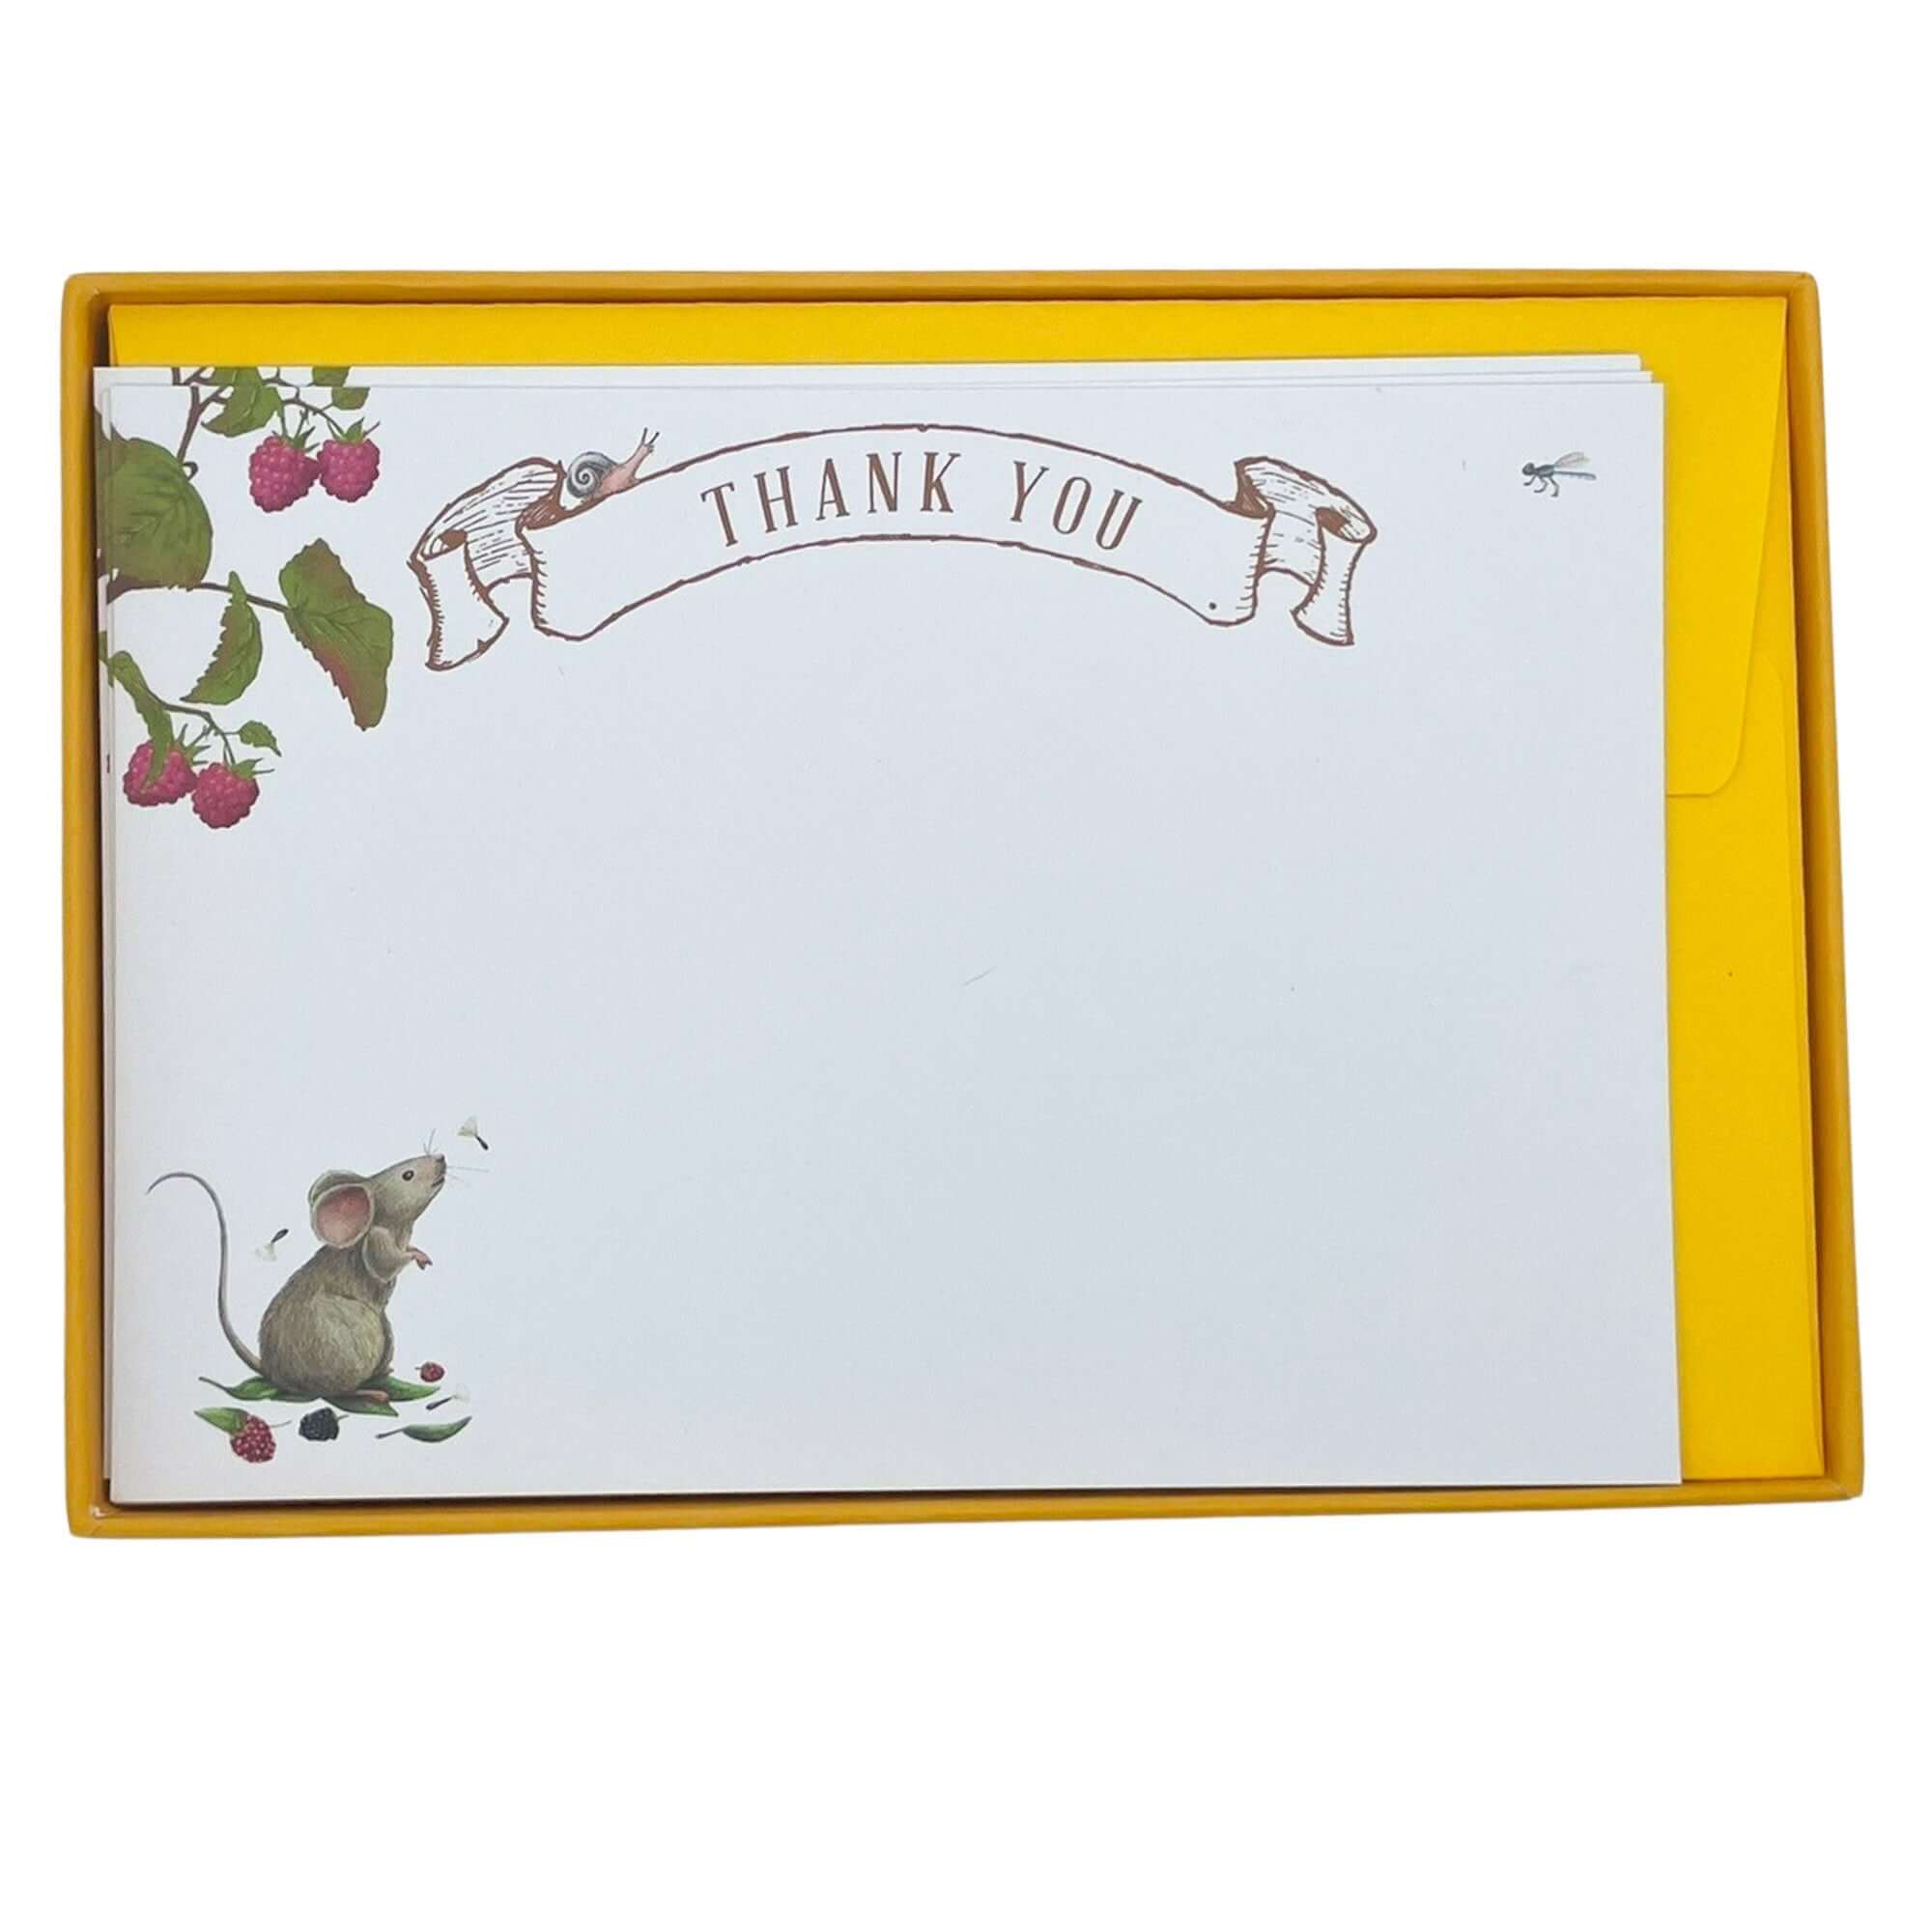 Harvest Mouse Nature Thank You Notecard Set Children's Notecards Mustard and Gray Ltd Shropshire UK